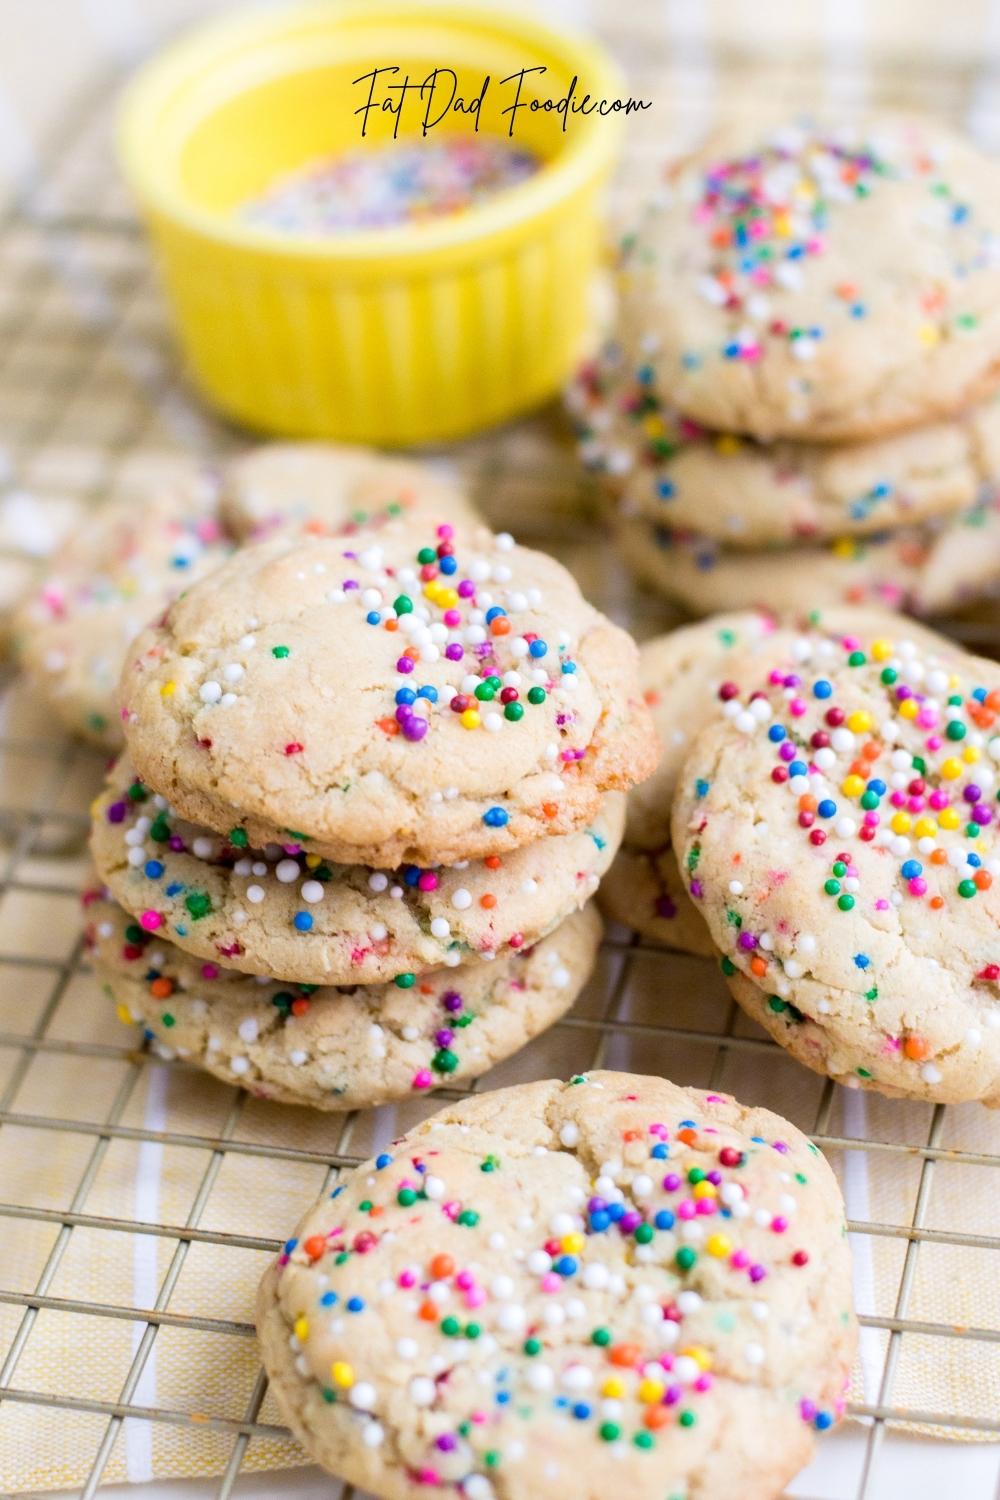 confetti cookies on cooking rack